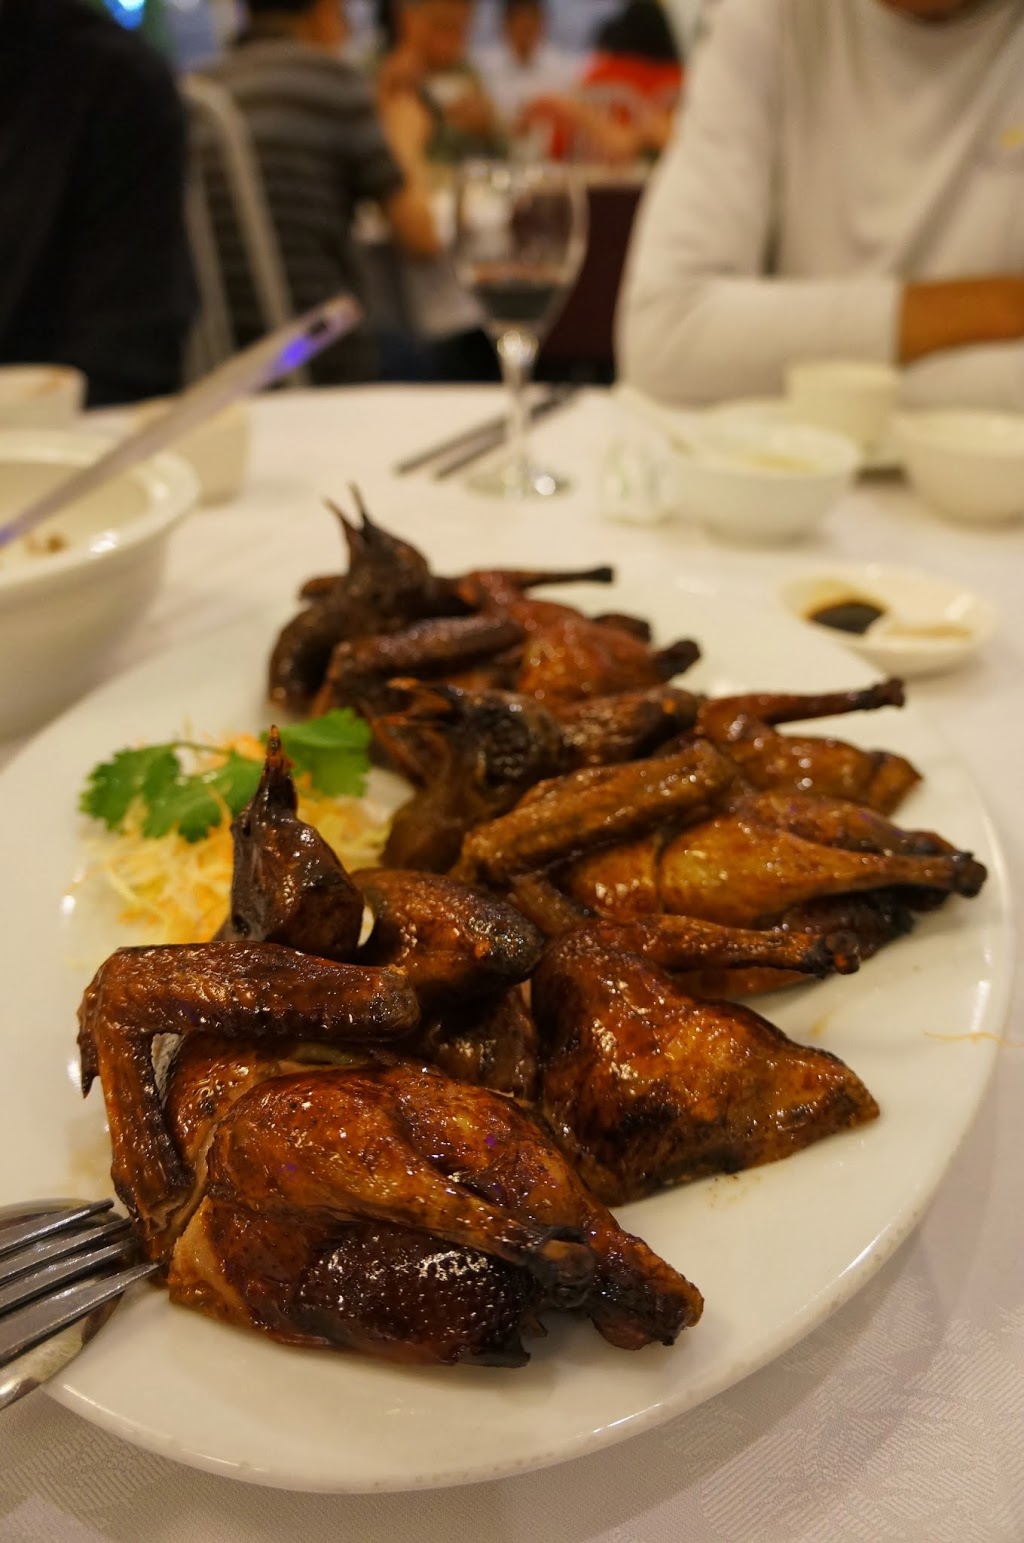 Fortune King Seafood Restaurant | restaurant | 495 King Georges Rd, Beverly Hills NSW 2209, Australia | 0295805609 OR +61 2 9580 5609